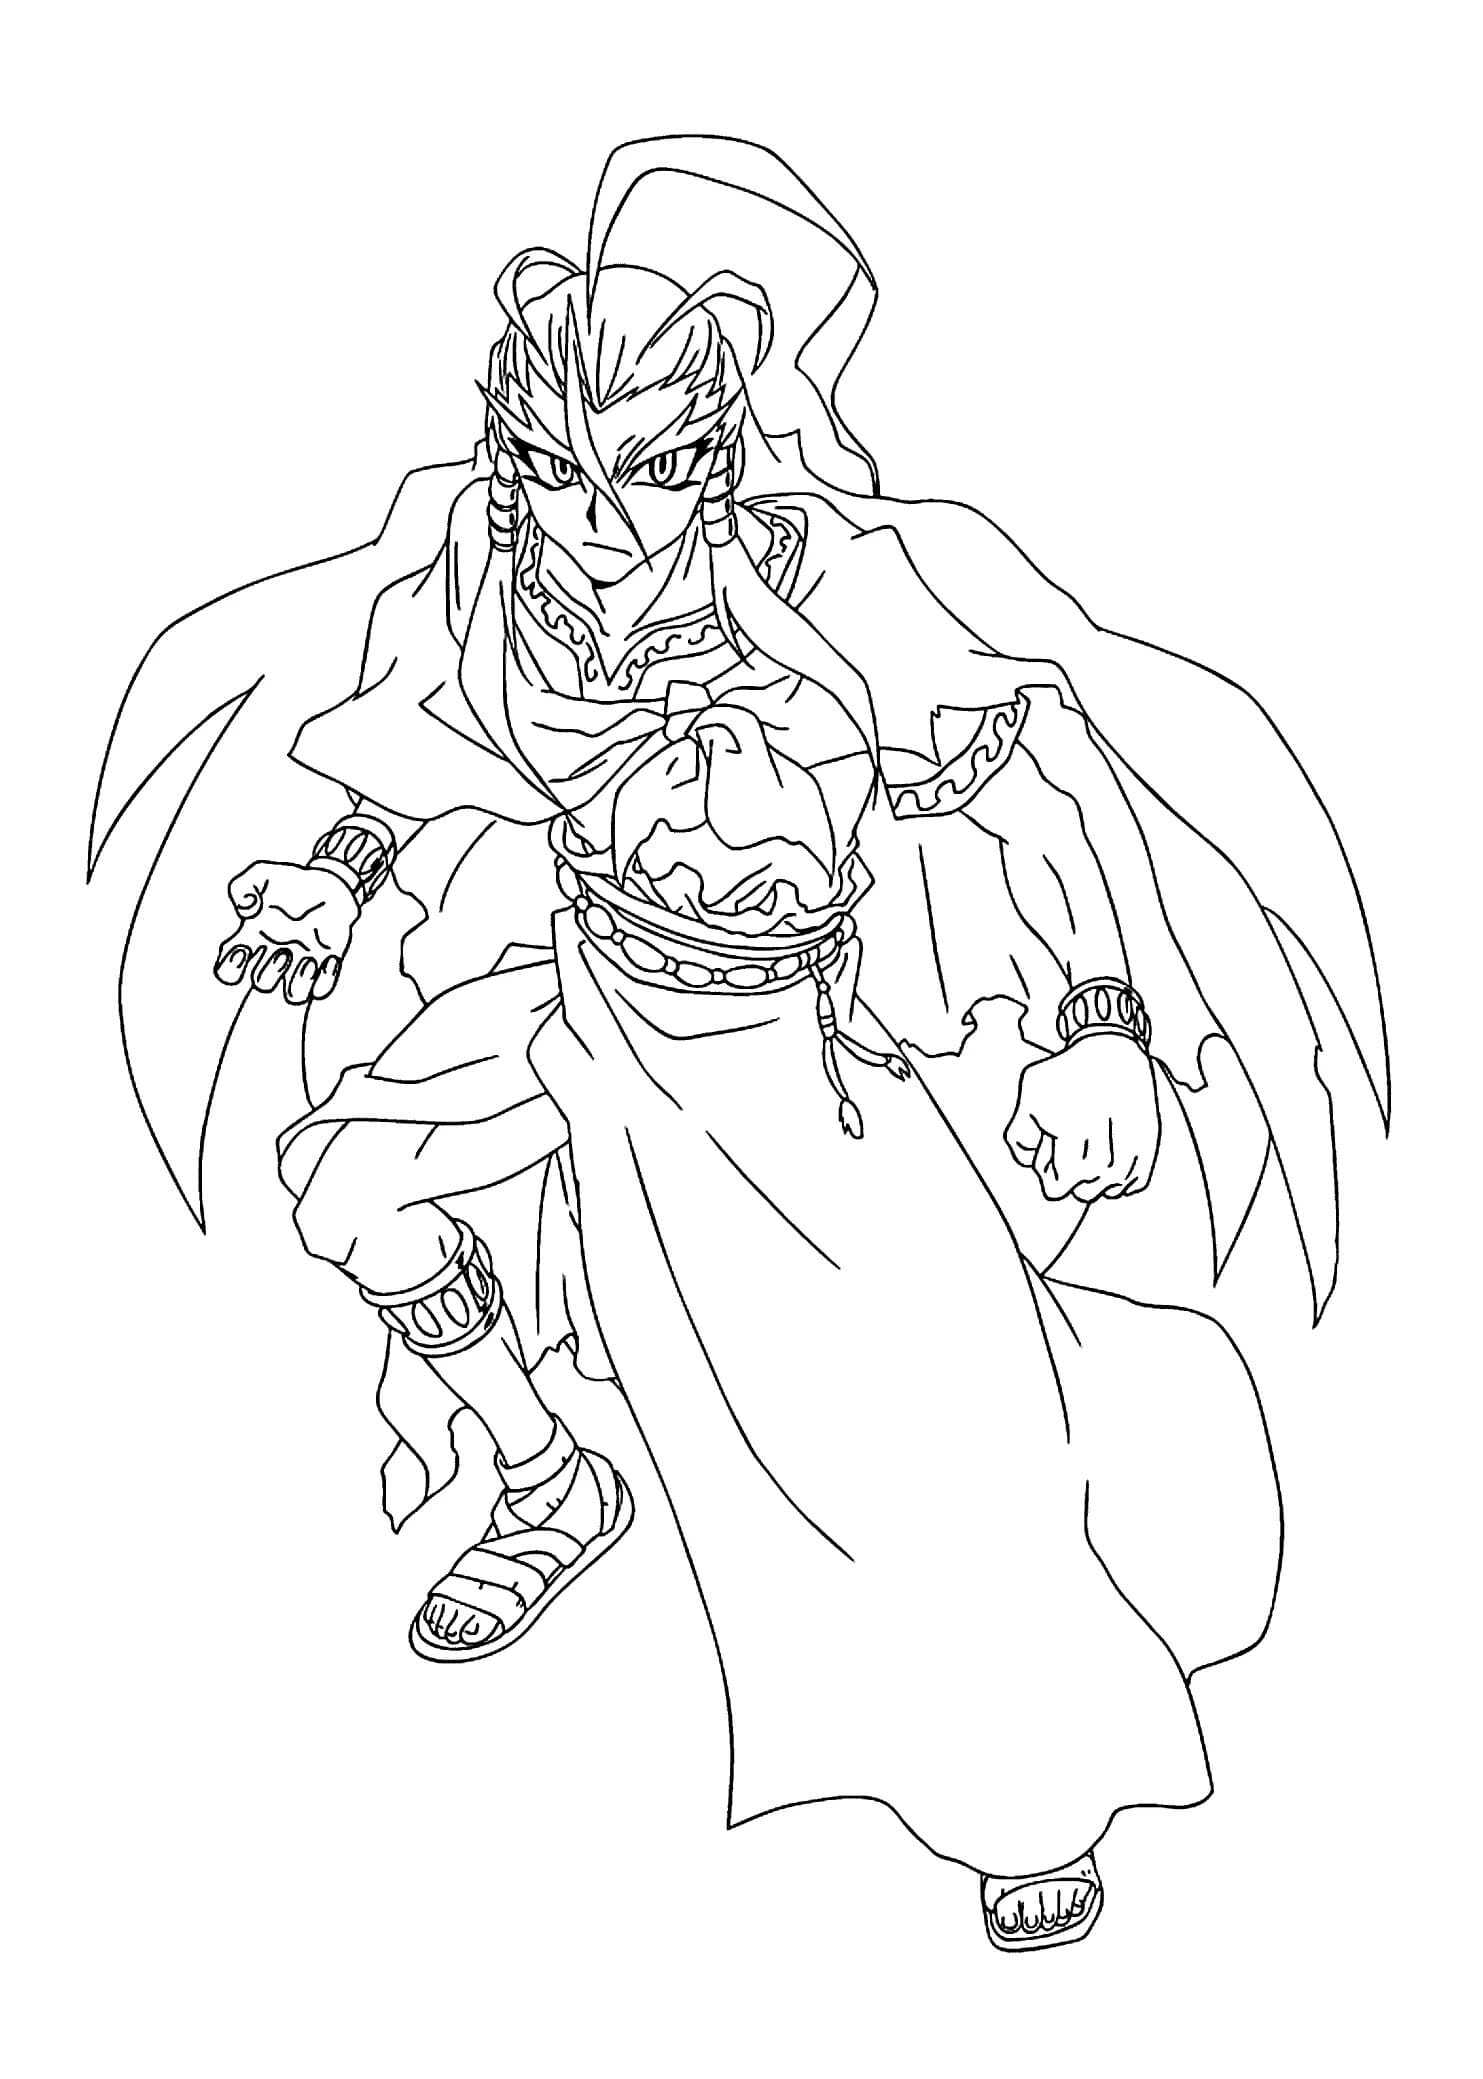 Blade With ChildrenIdol Coloring Page